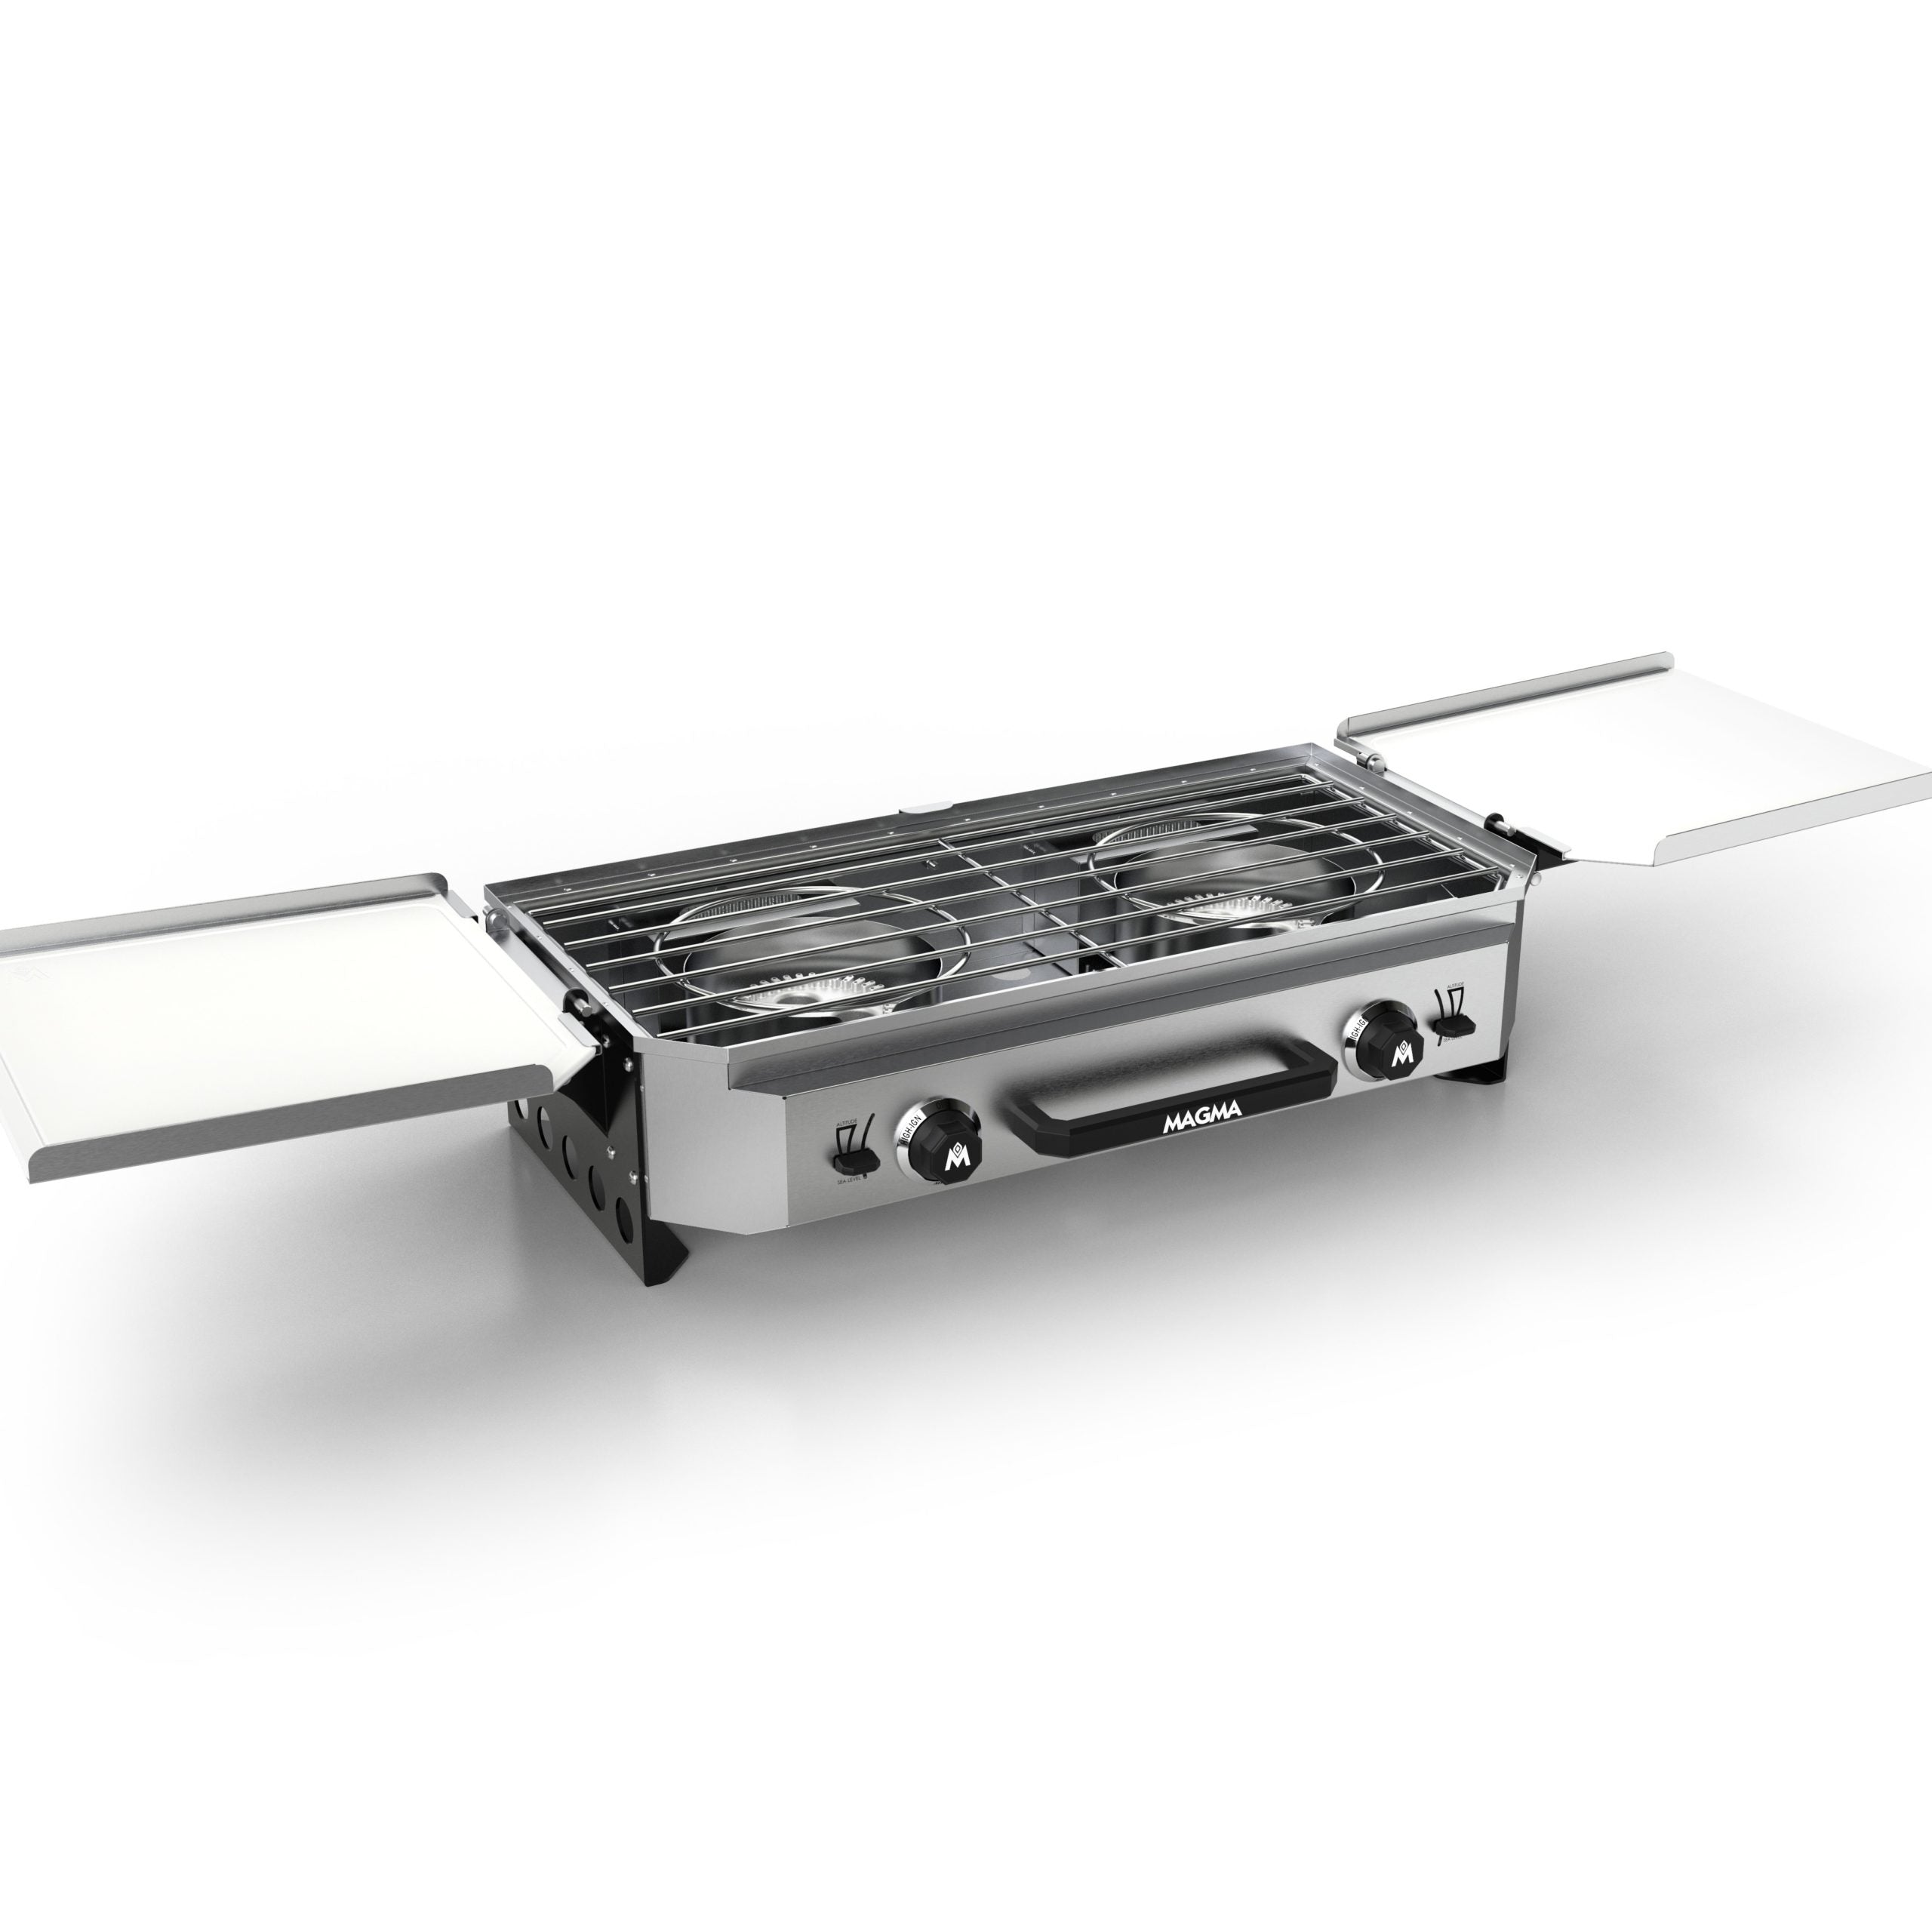 Airstream Cook Top Cover, Flying Cloud, International, Stainless Lid, Range  Top Cover